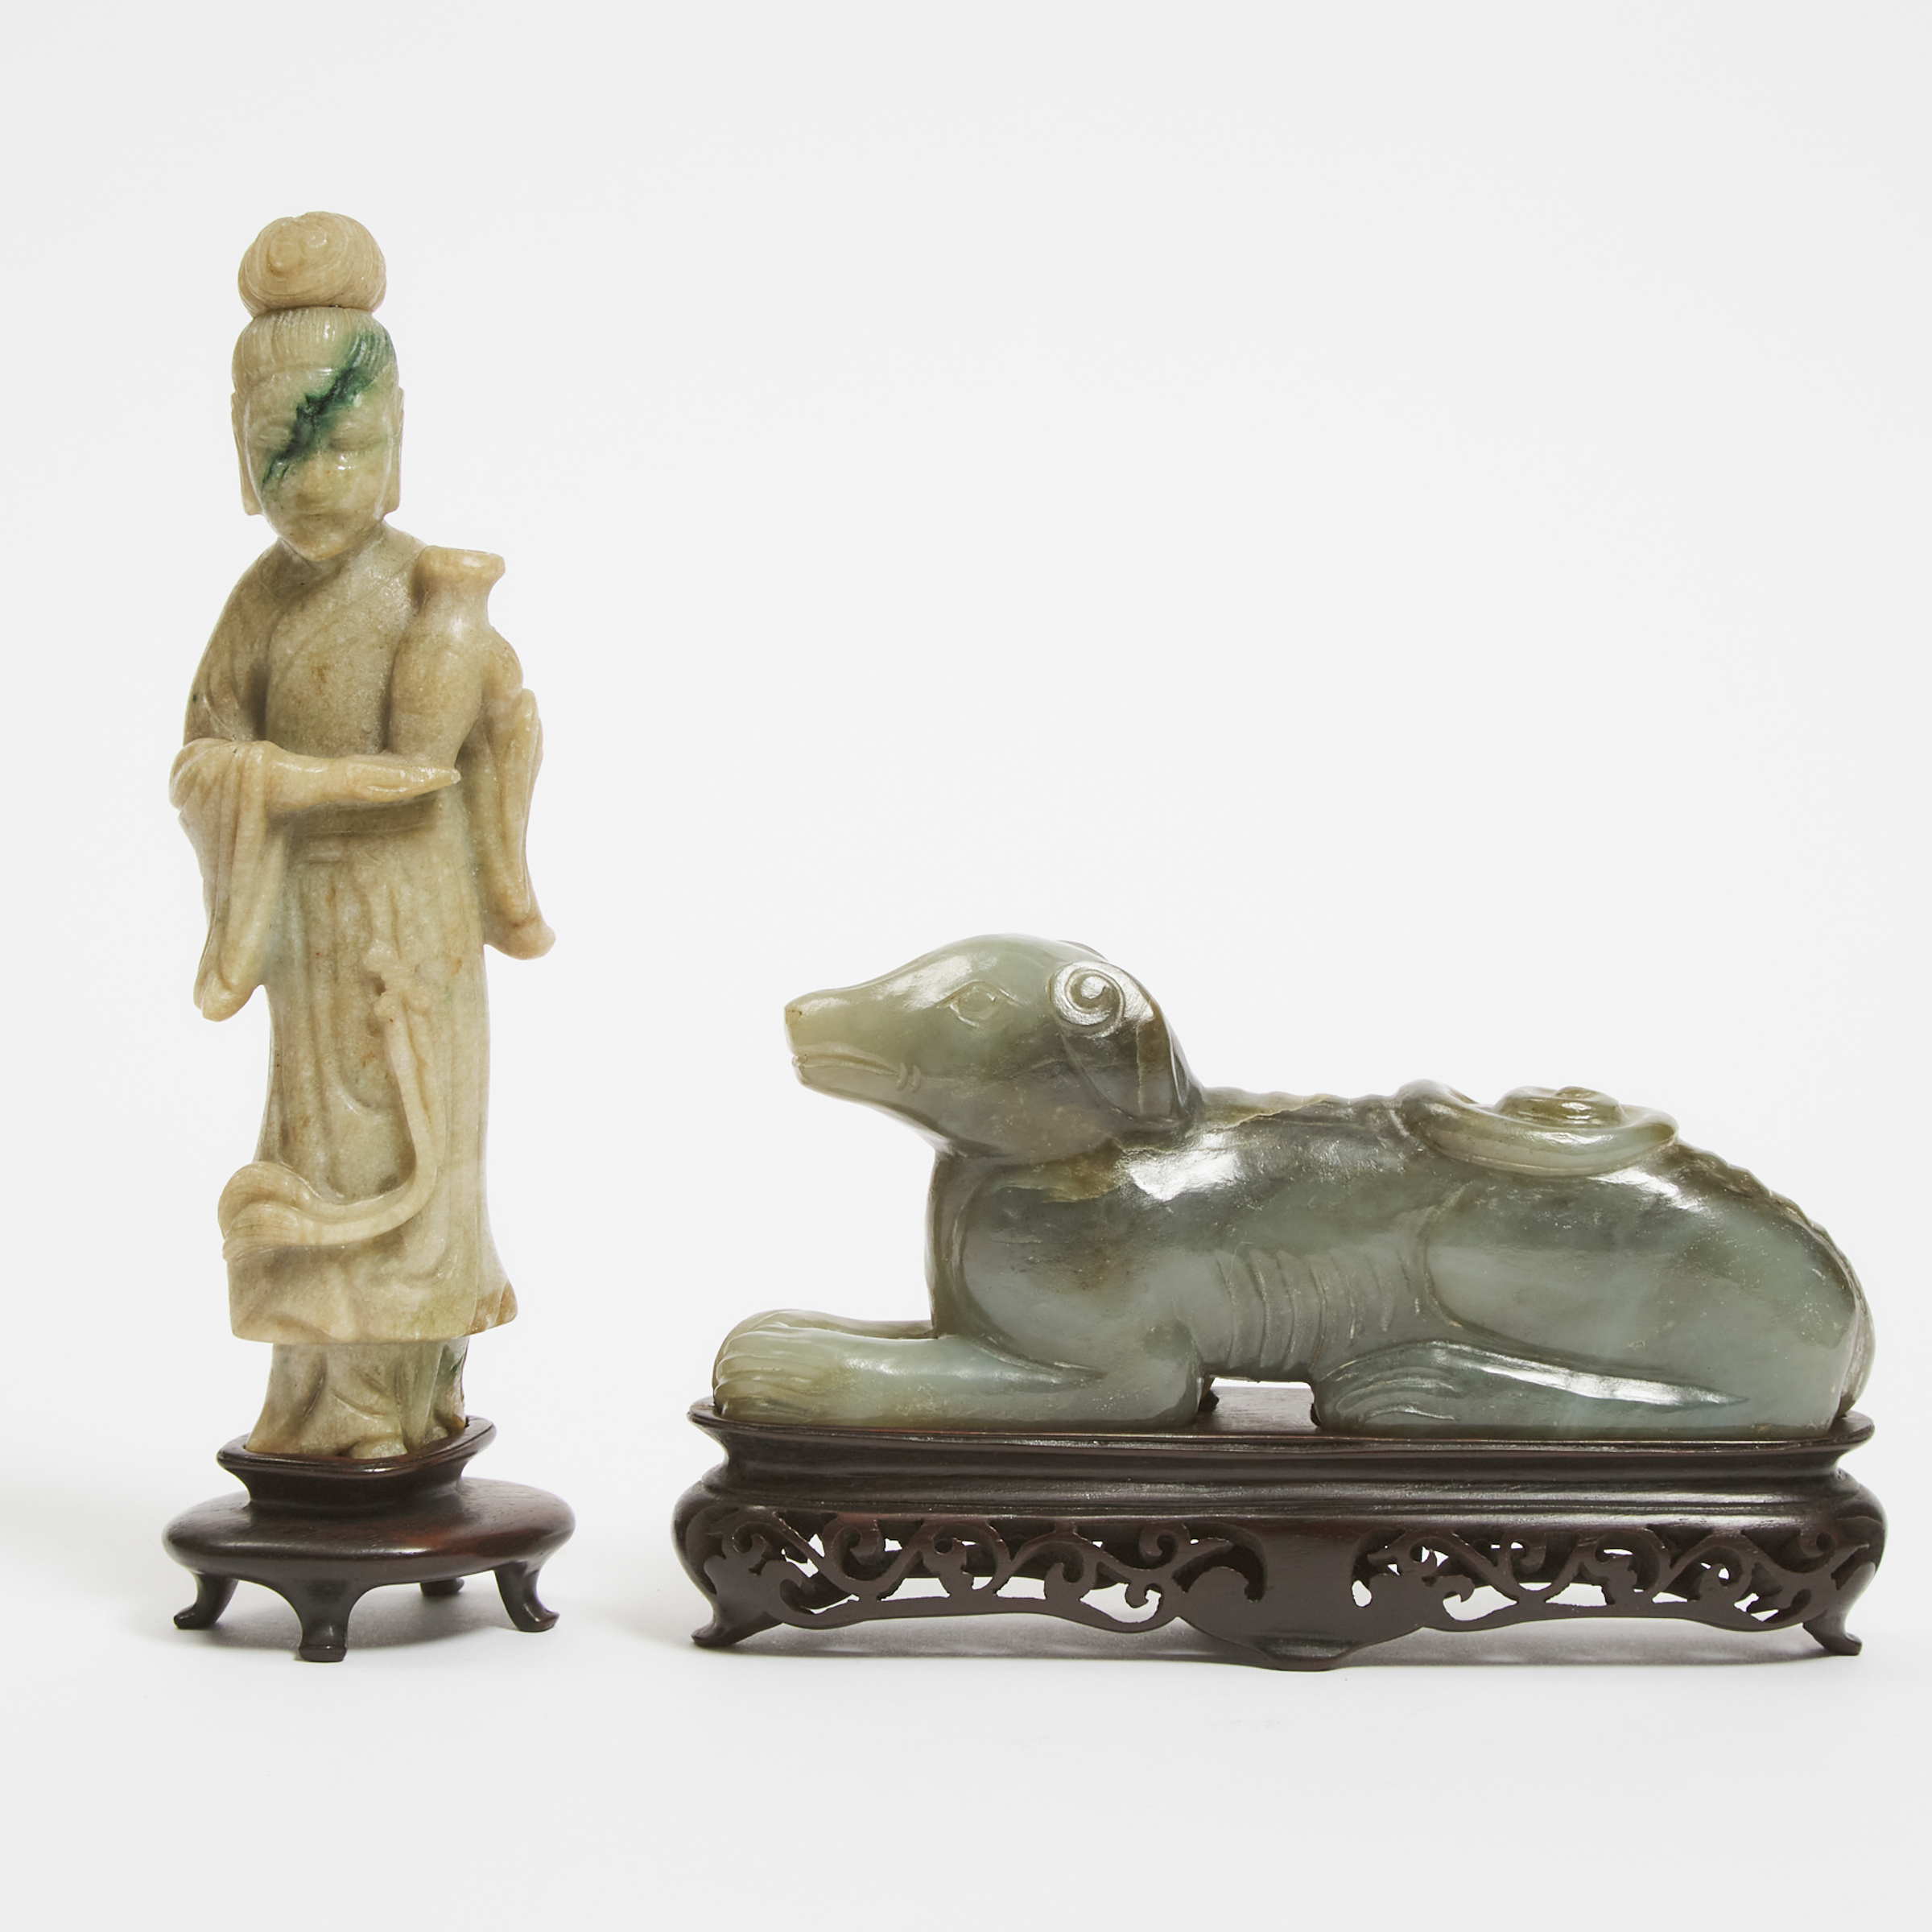 A Jadeite Figure of a Lady, Together With a Jade Dog, Early 20th Century